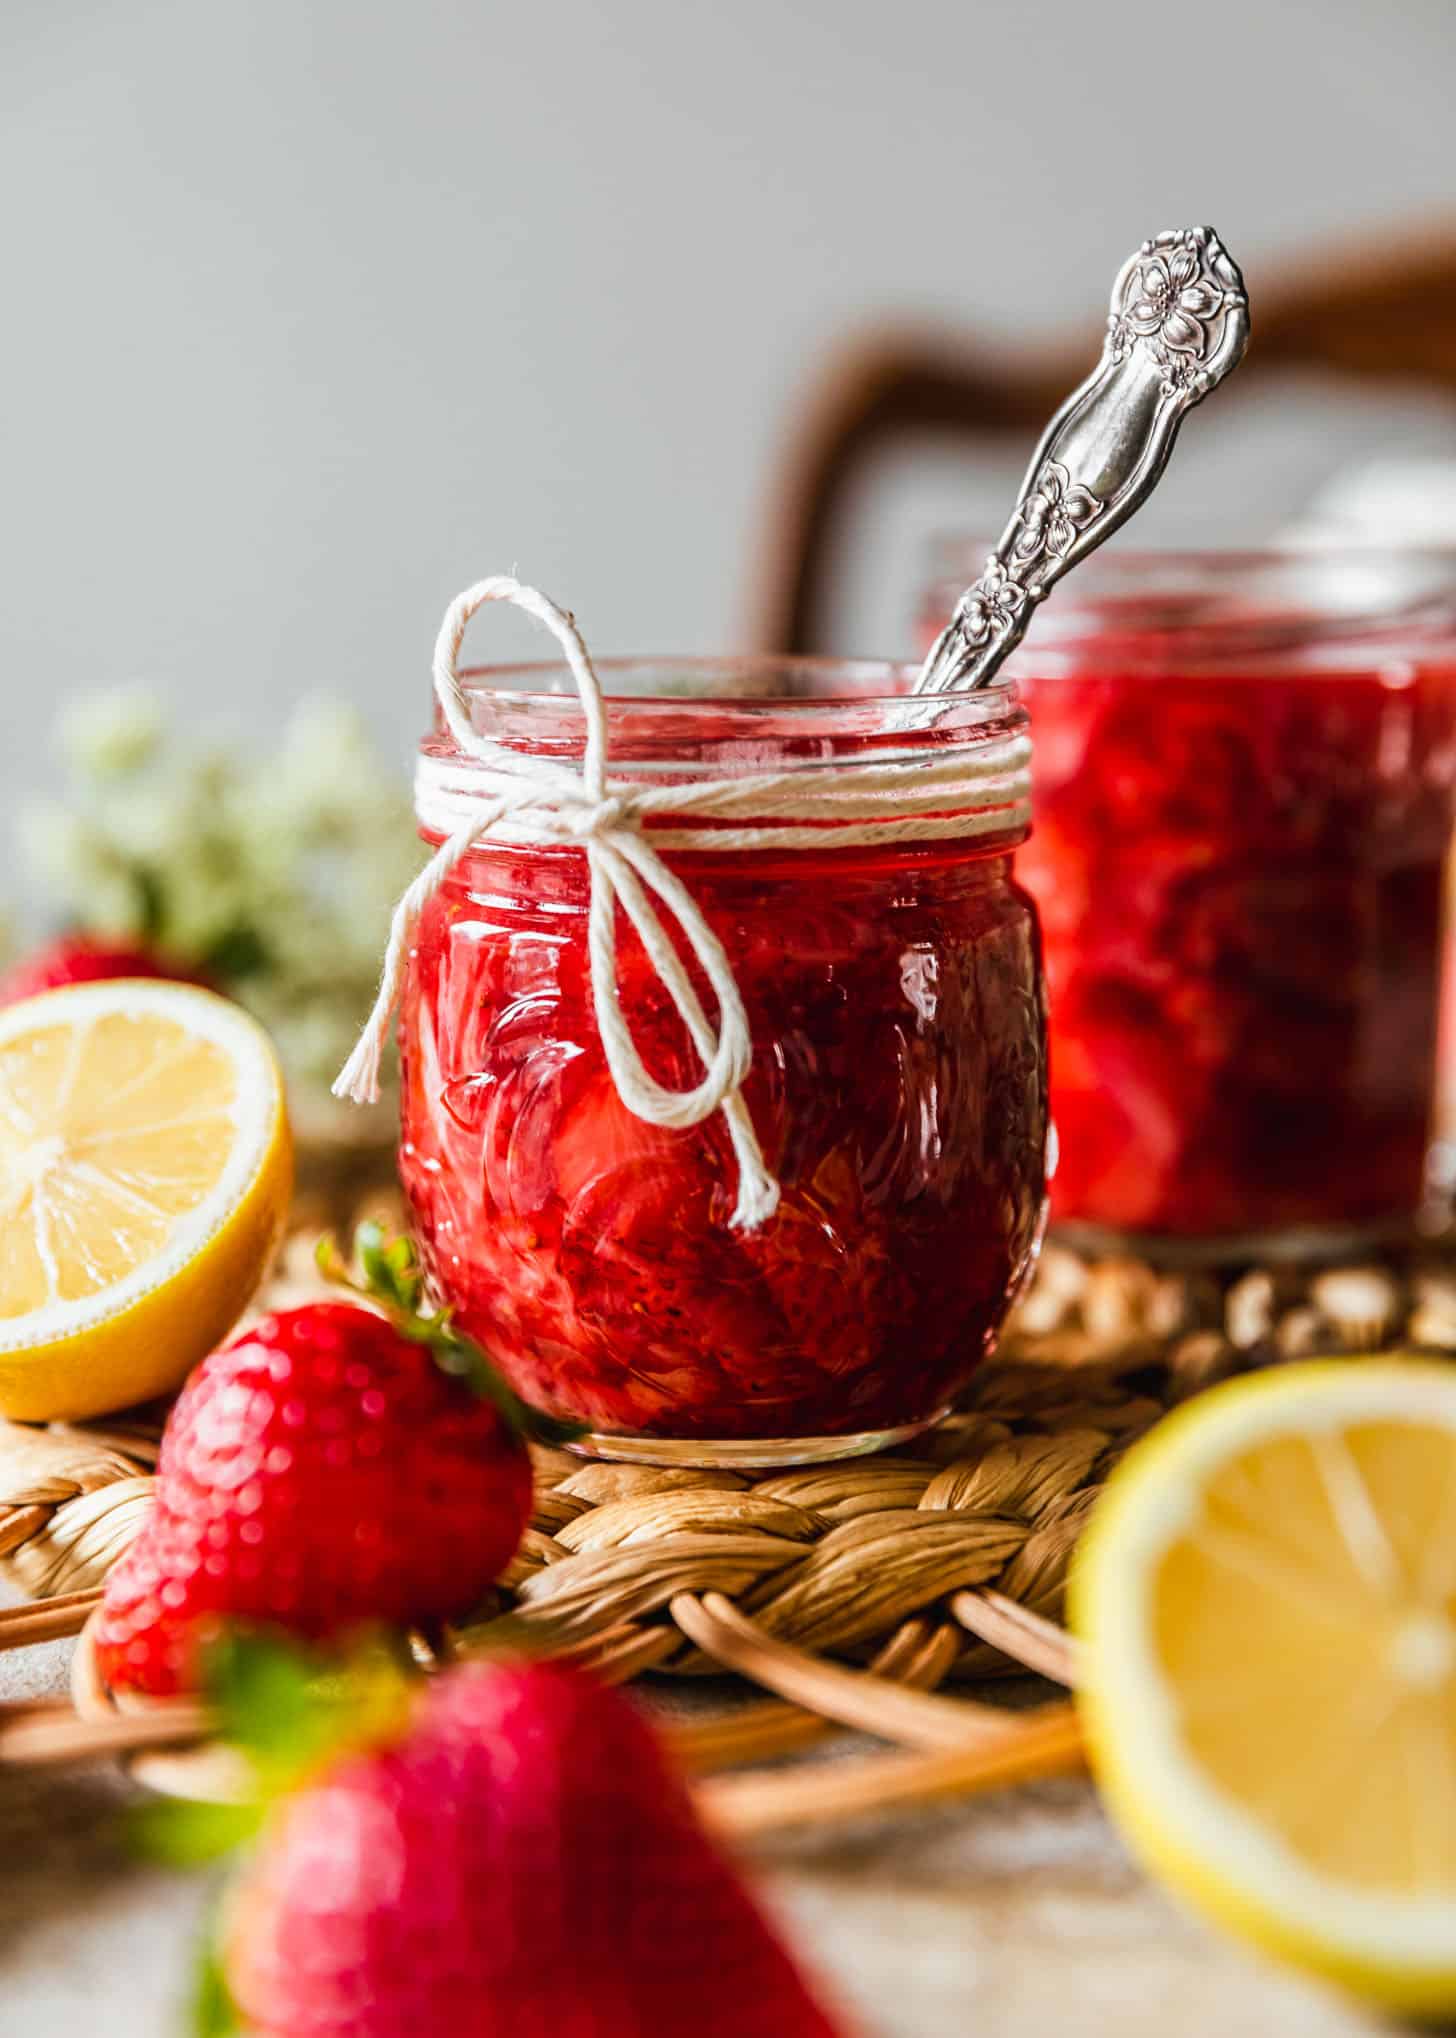 A jar of strawberry compote with a spoon and a jar of strawberry coulis on a brown woven placemat next to lemons and strawberries.